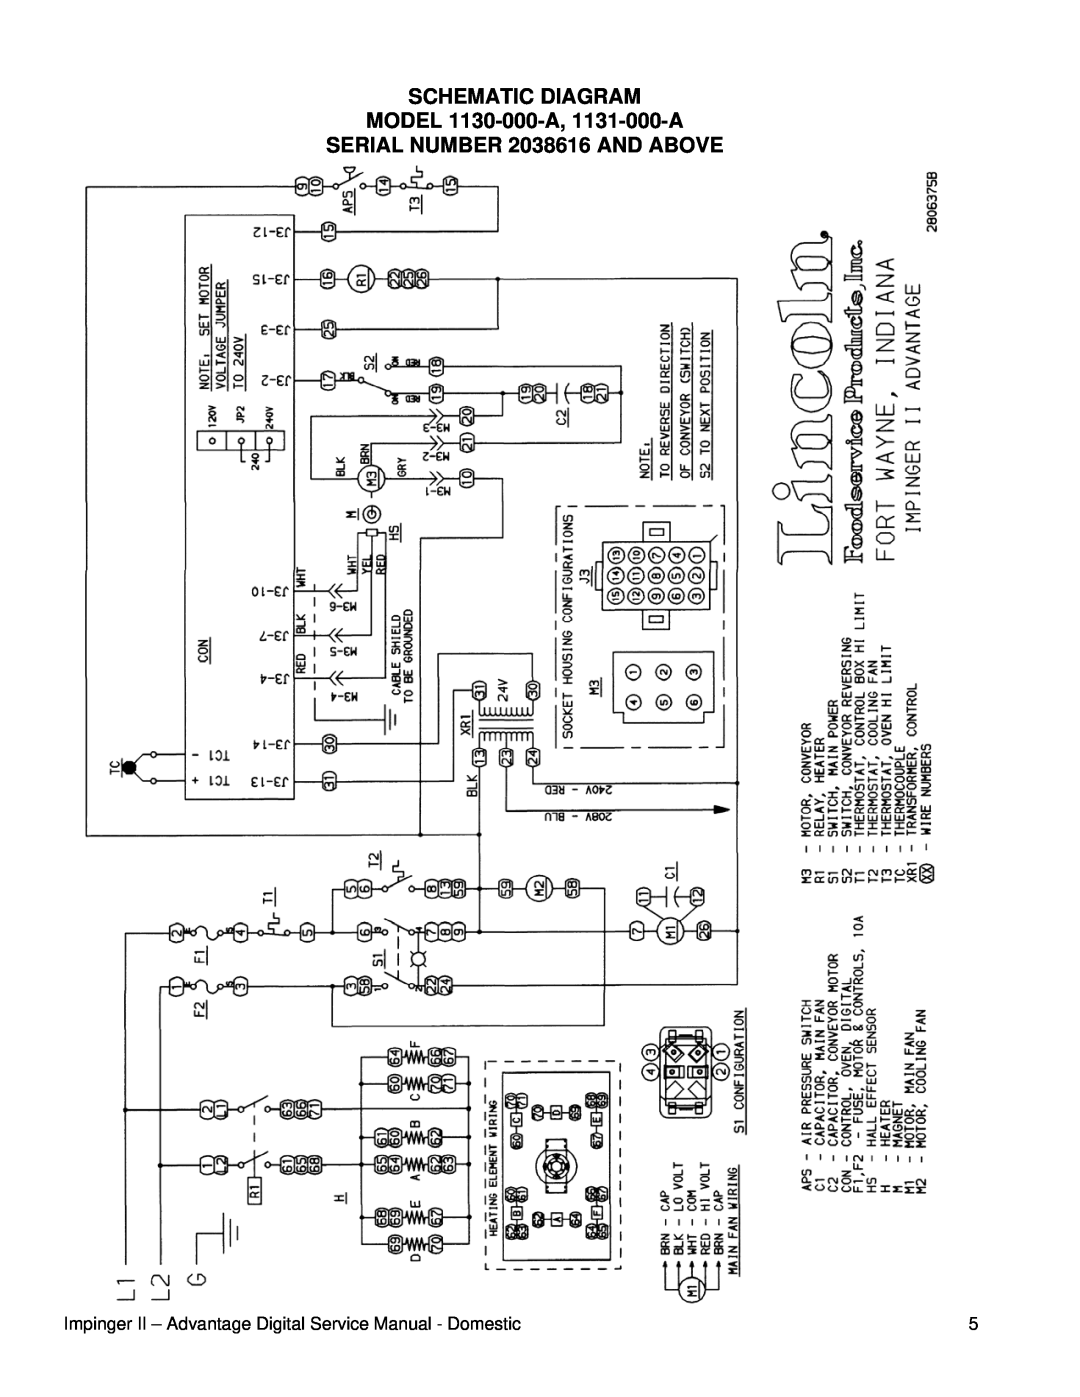 Lincoln 1117-000-A, 1133-000-A, 116-000-A SCHEMATIC DIAGRAM MODEL 1130-000-A, 1131-000-A, SERIAL NUMBER 2038616 AND ABOVE 